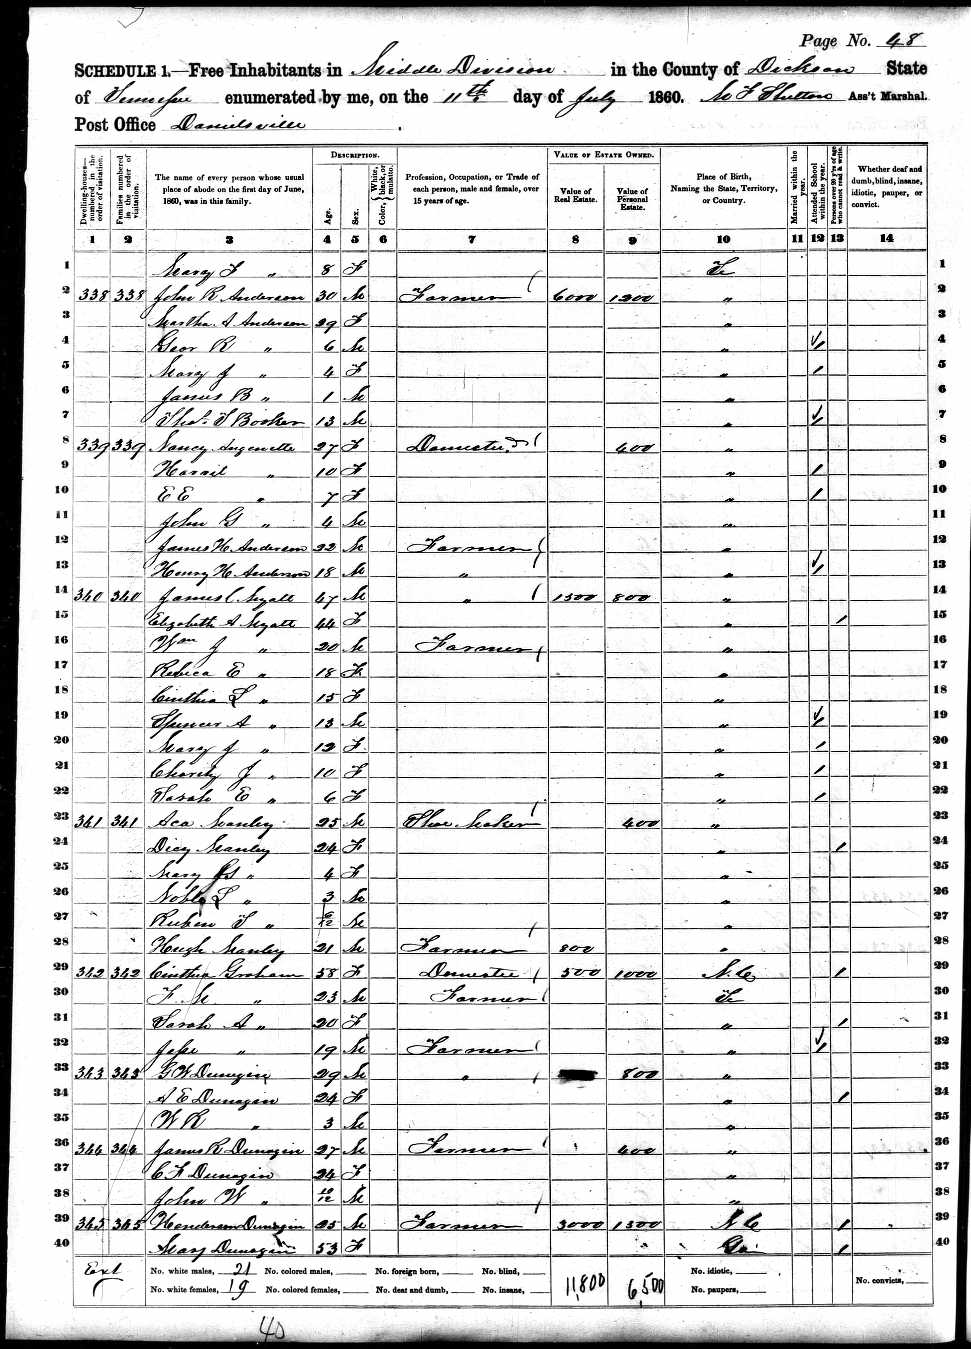 James Henderson Donnagan, 1860 Dickson County, Tennessee, census